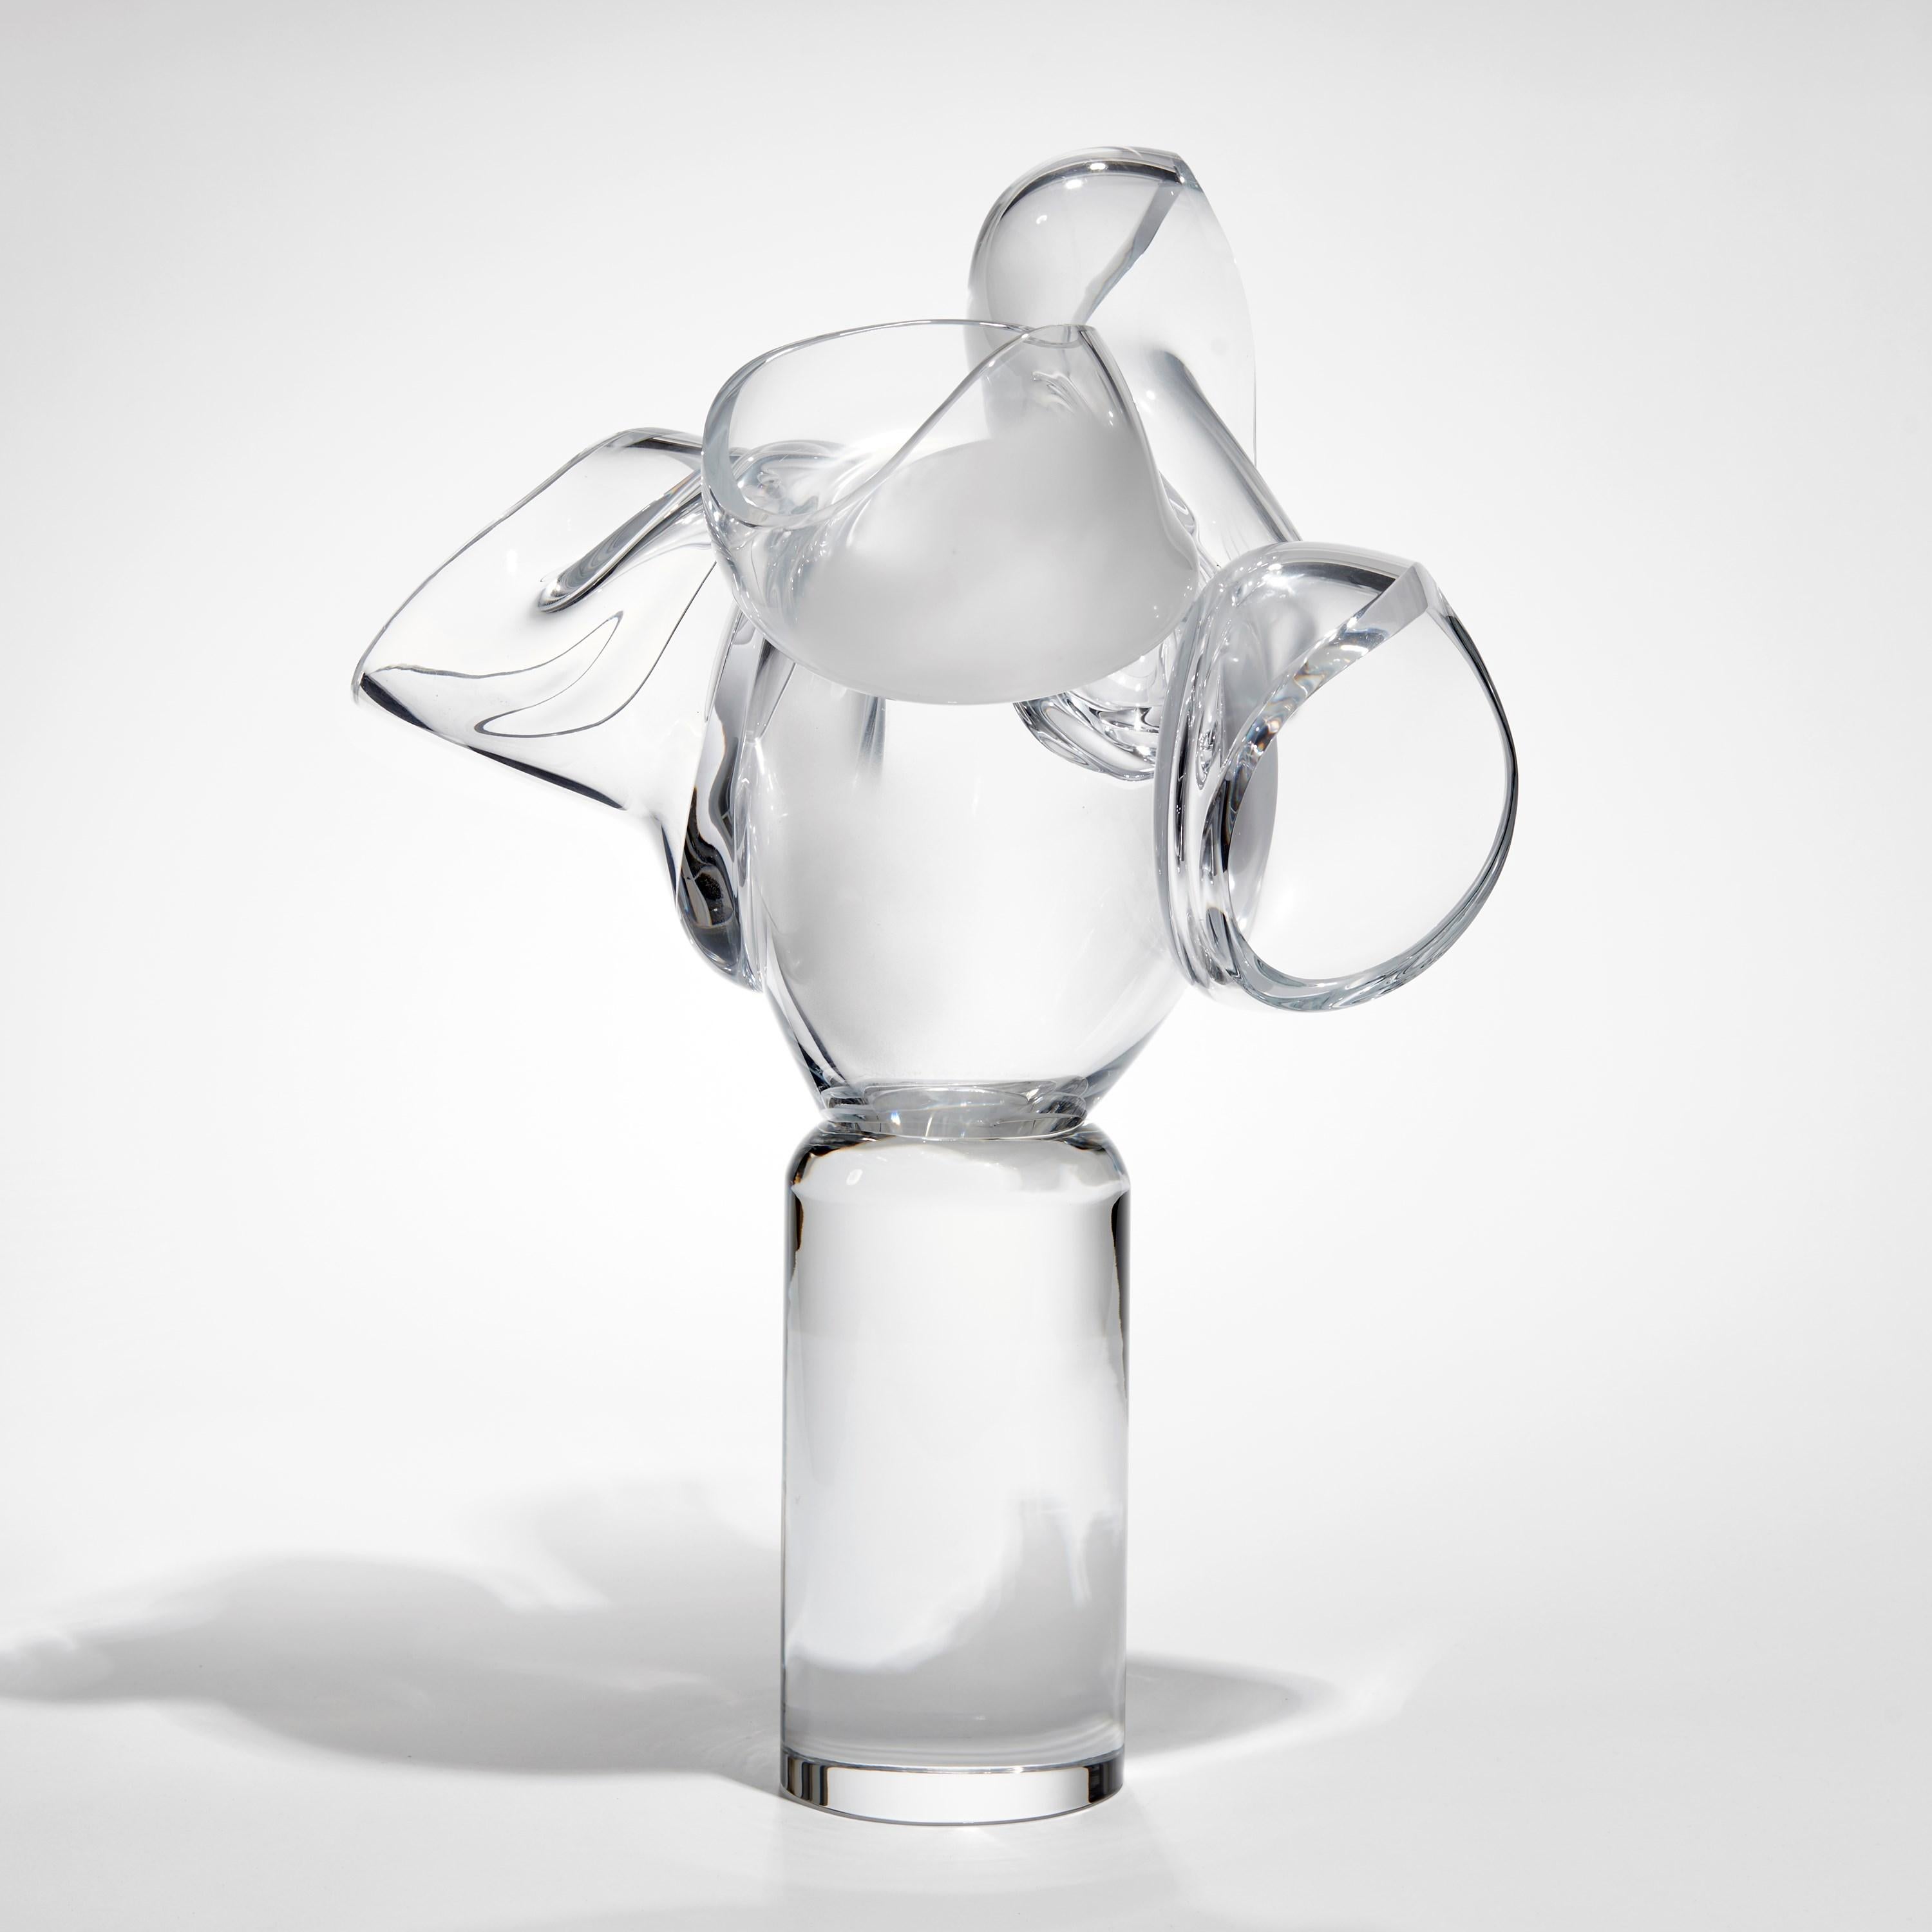 'Heart Flower in Clear & Frost' is a unique artwork by the Swedish artist and designer, Lena Bergström.

Created for 'Lena 25+', Bergström's 2022 solo exhibition celebrating the 25 years and more for which she has been designing glass for the